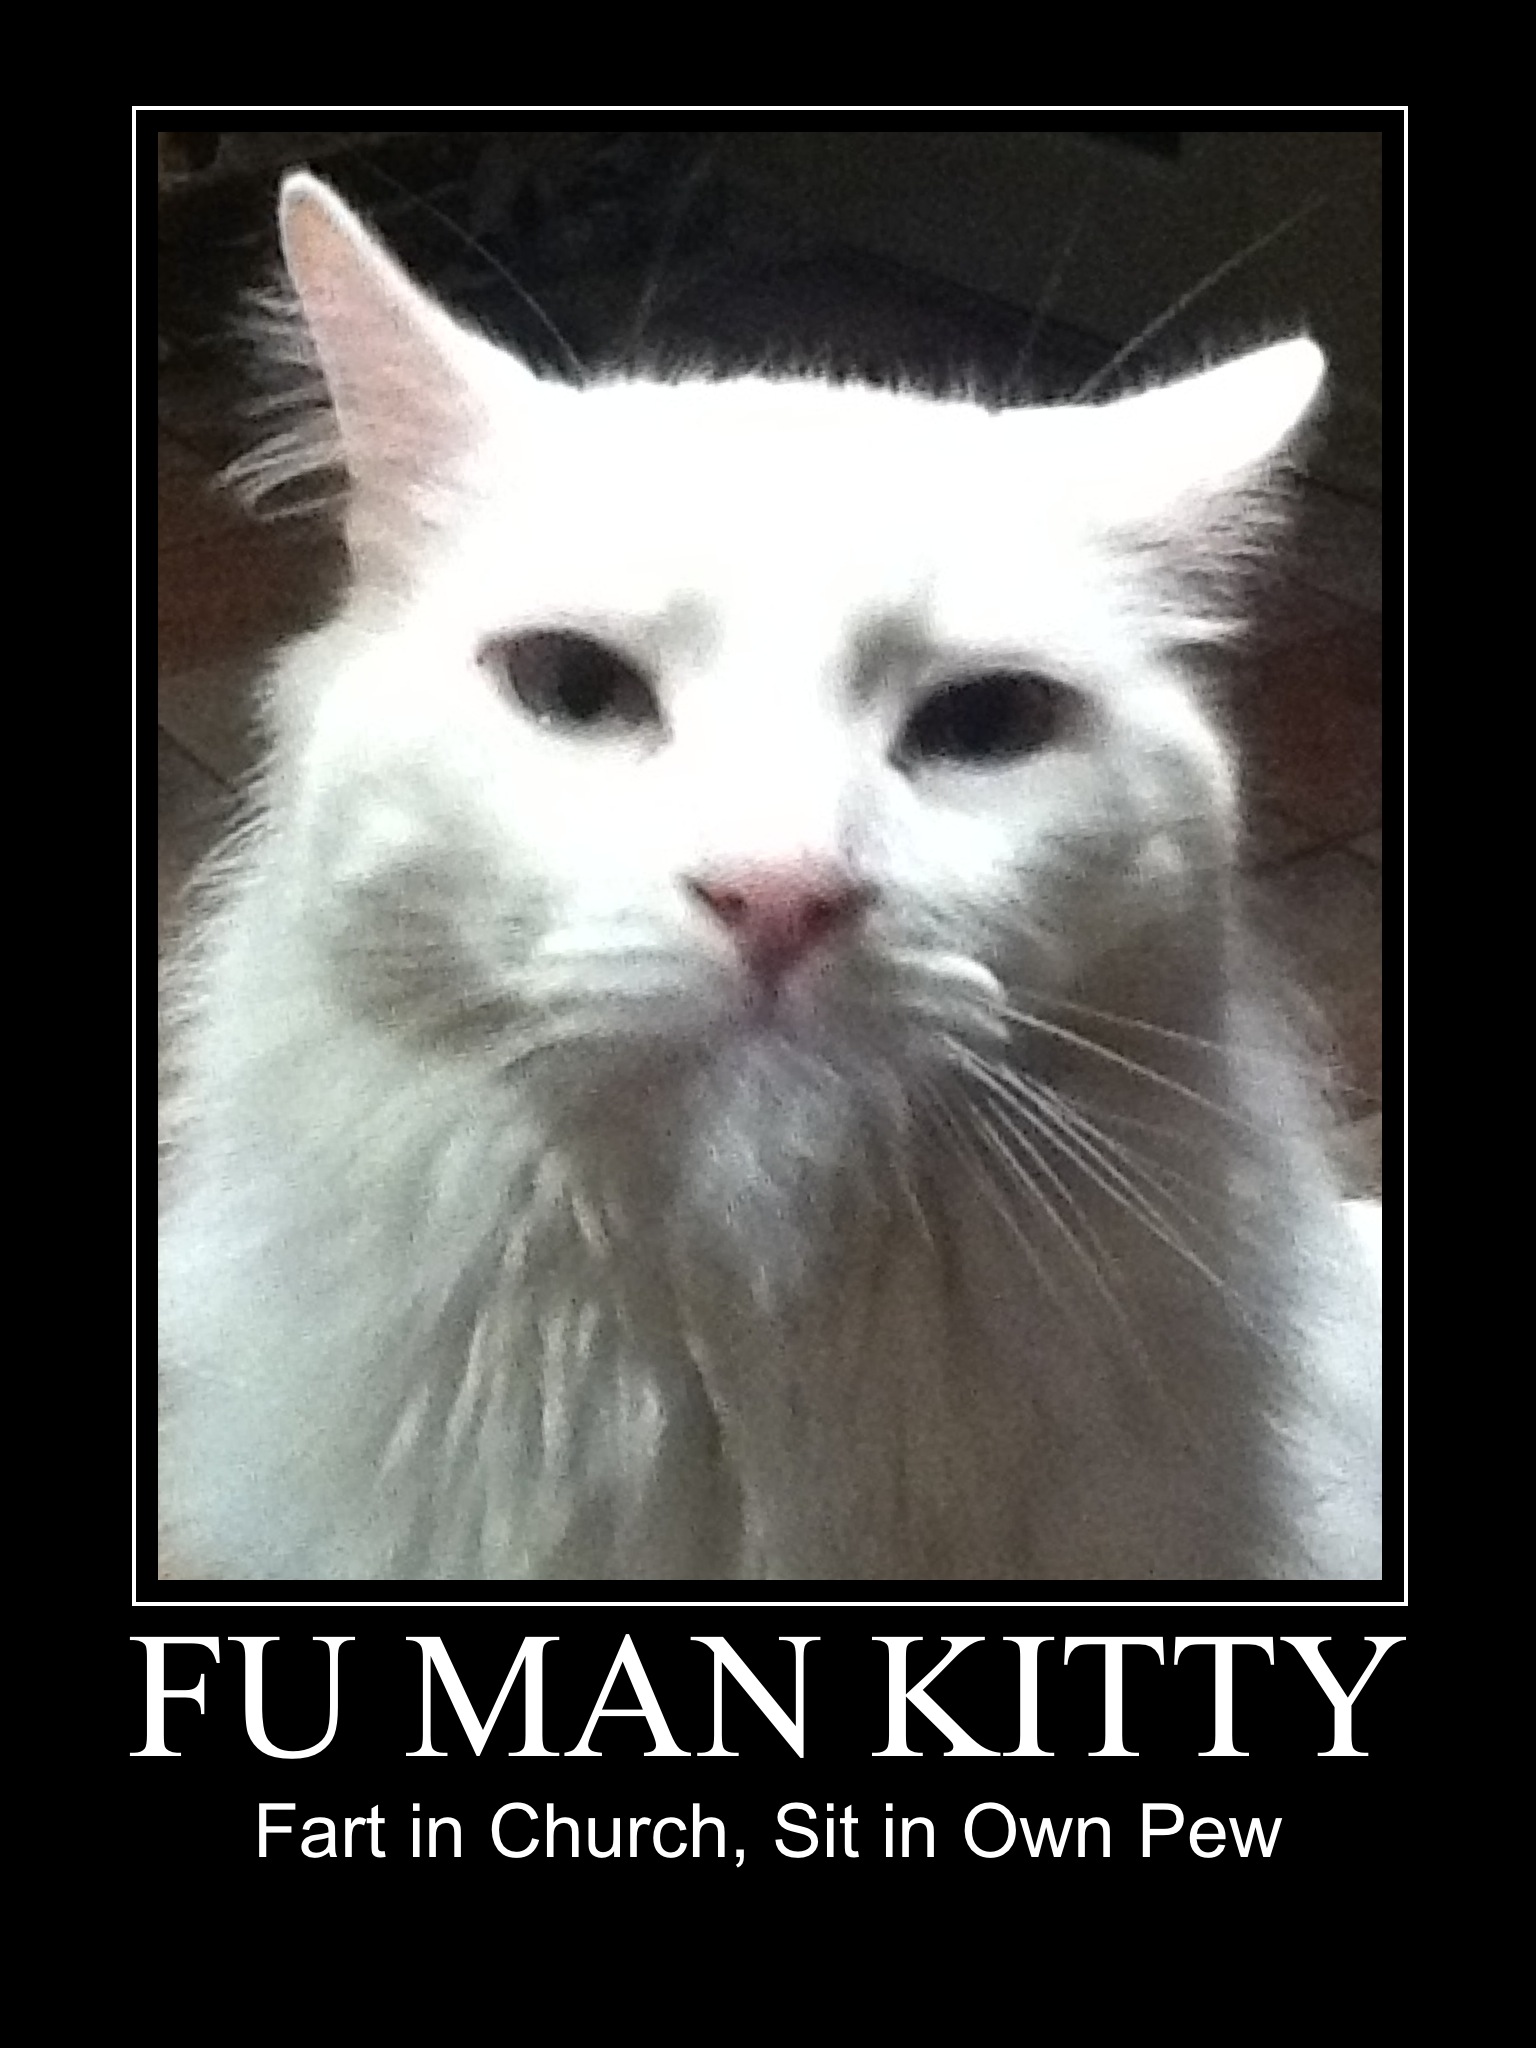 Fu Man Kitty with a saying.